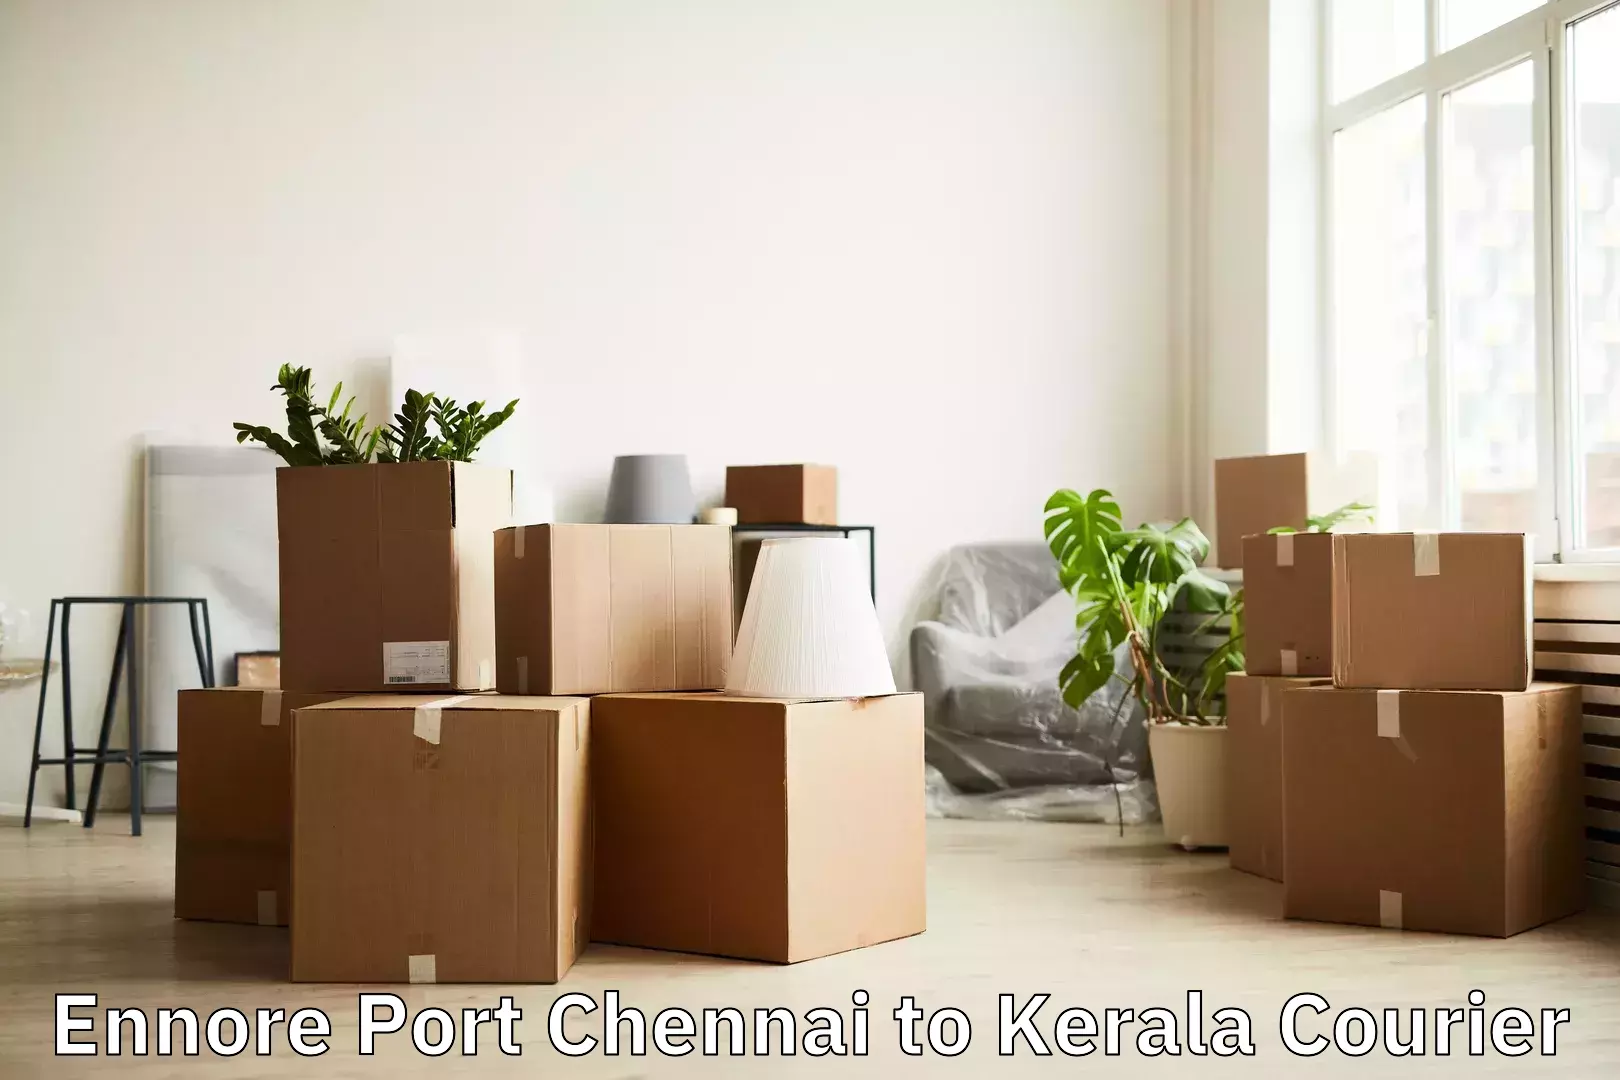 Luggage delivery app Ennore Port Chennai to IIT Palakkad